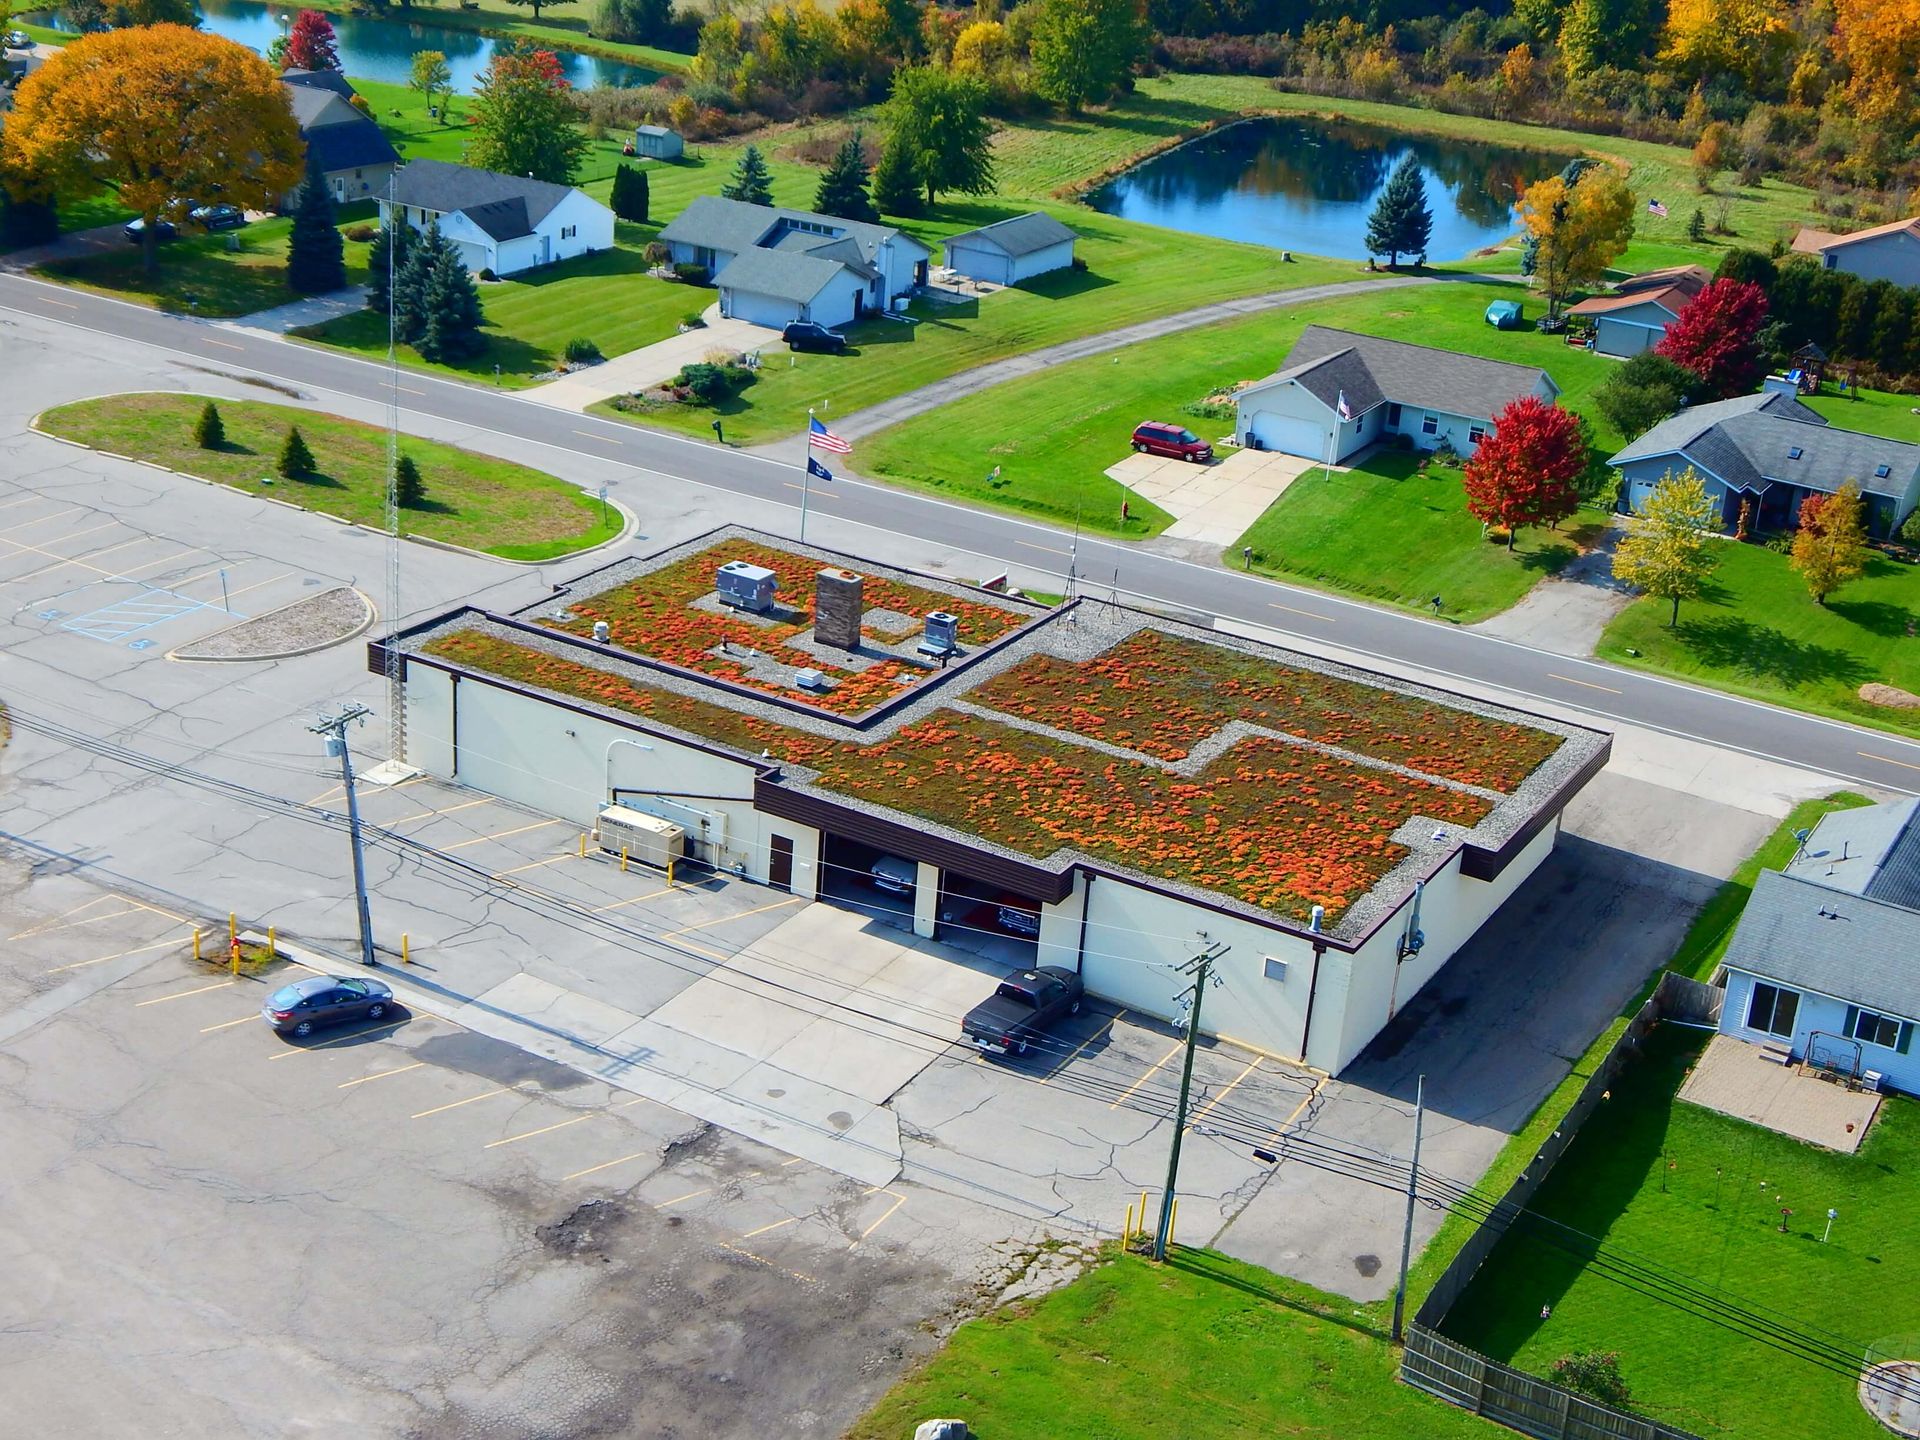 An aerial view of a building with a green roof.